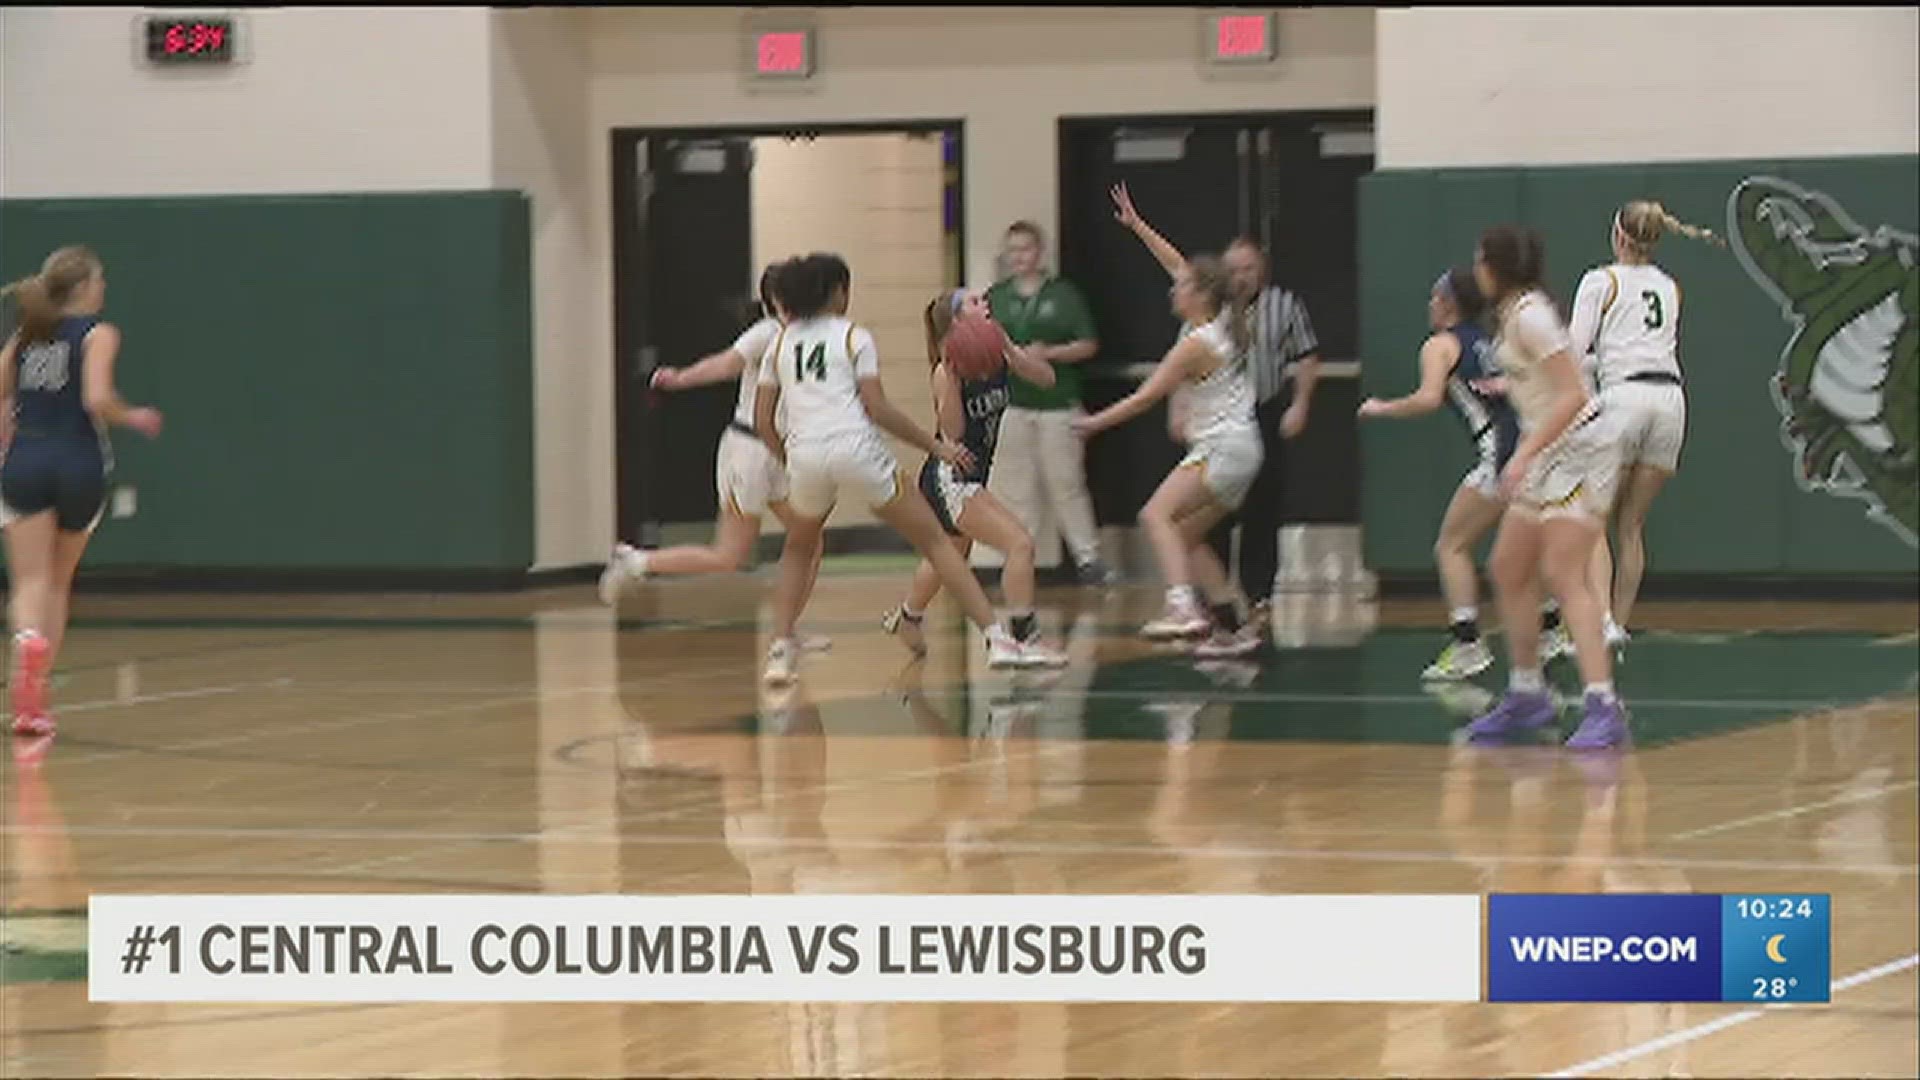 Central Columbia girls ended their regular season with a win against Lewisburg.